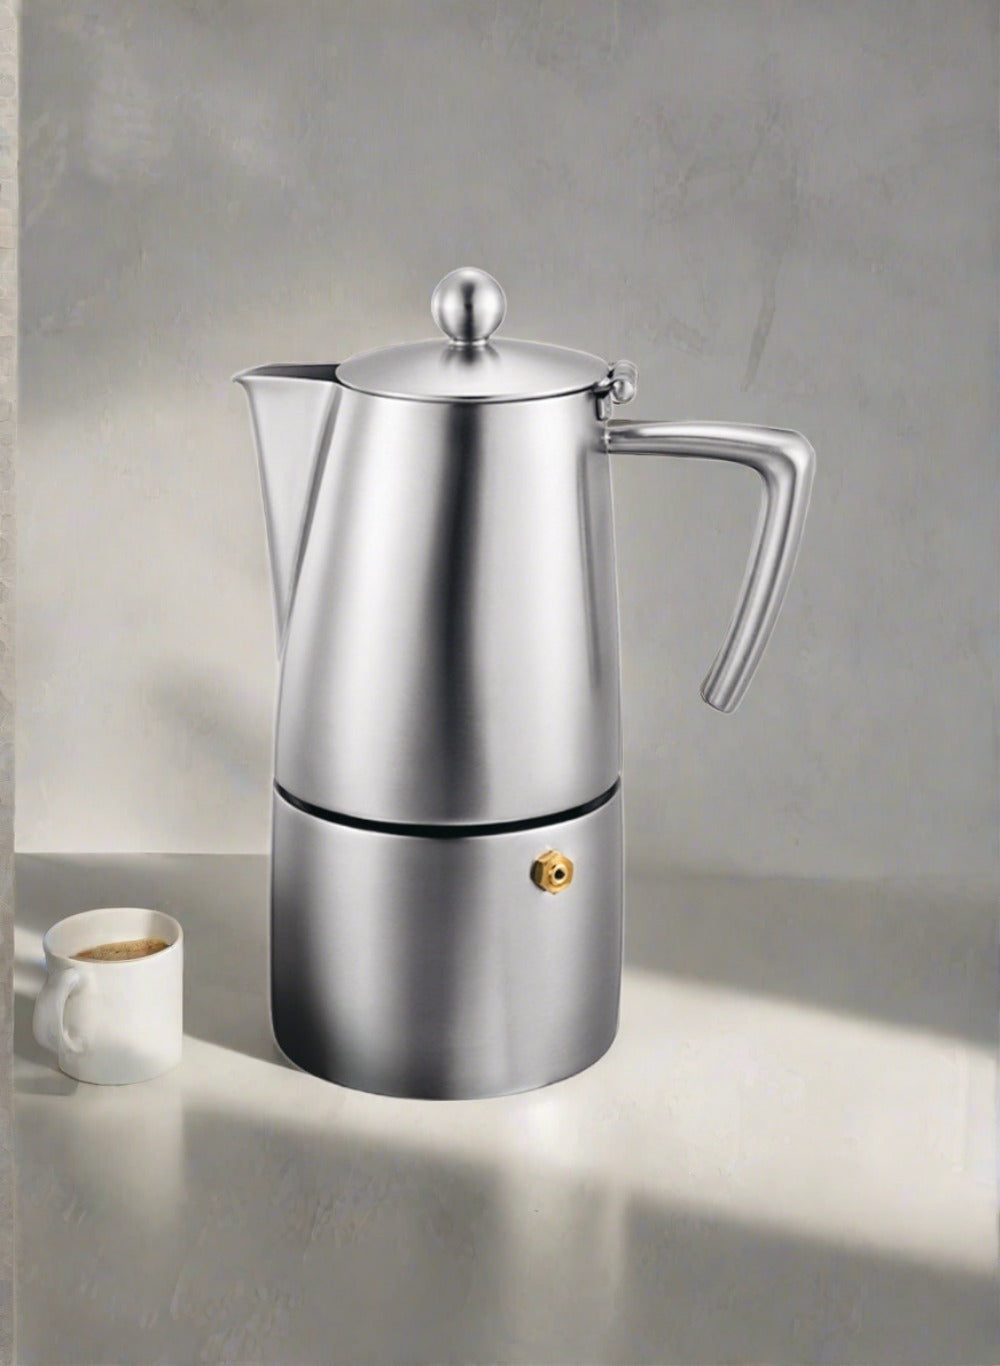 Cuisinox Milano Satin Stainless Steel Induction Stovetop Moka Espresso Coffee Maker, 6 cup